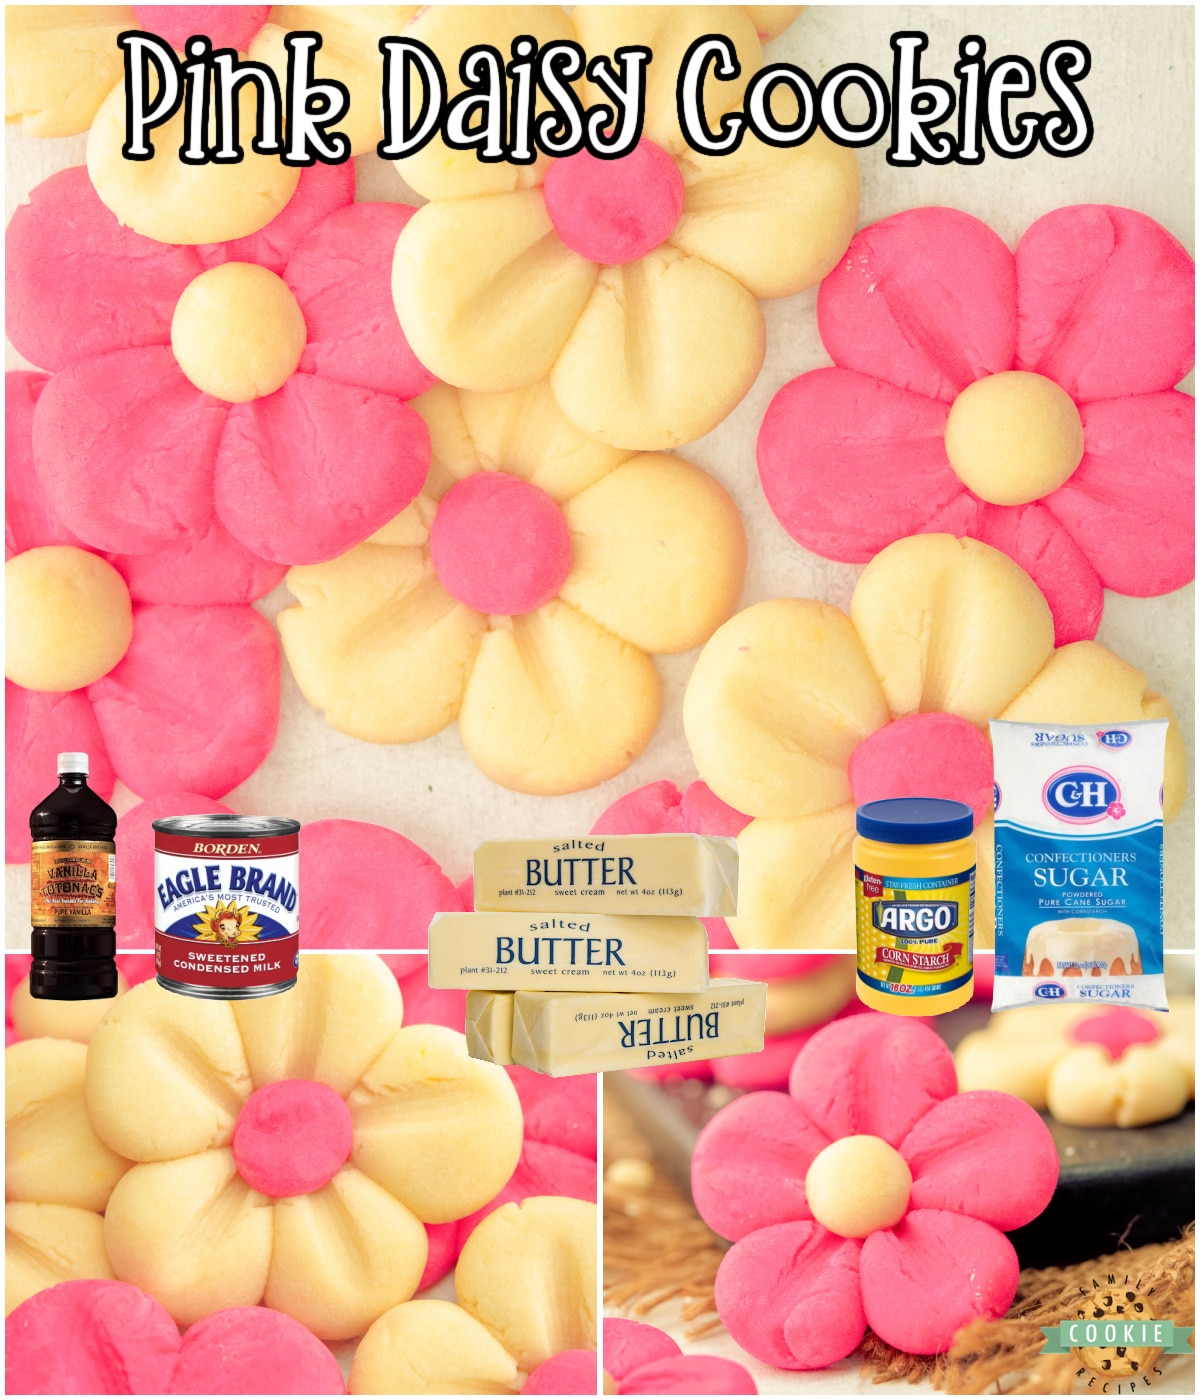 Pink Daisy Cookies are made from a buttery vanilla dough, formed to look like pretty blooming flower petals perfect for parties! Delightful butter cookies that melt in your mouth! 